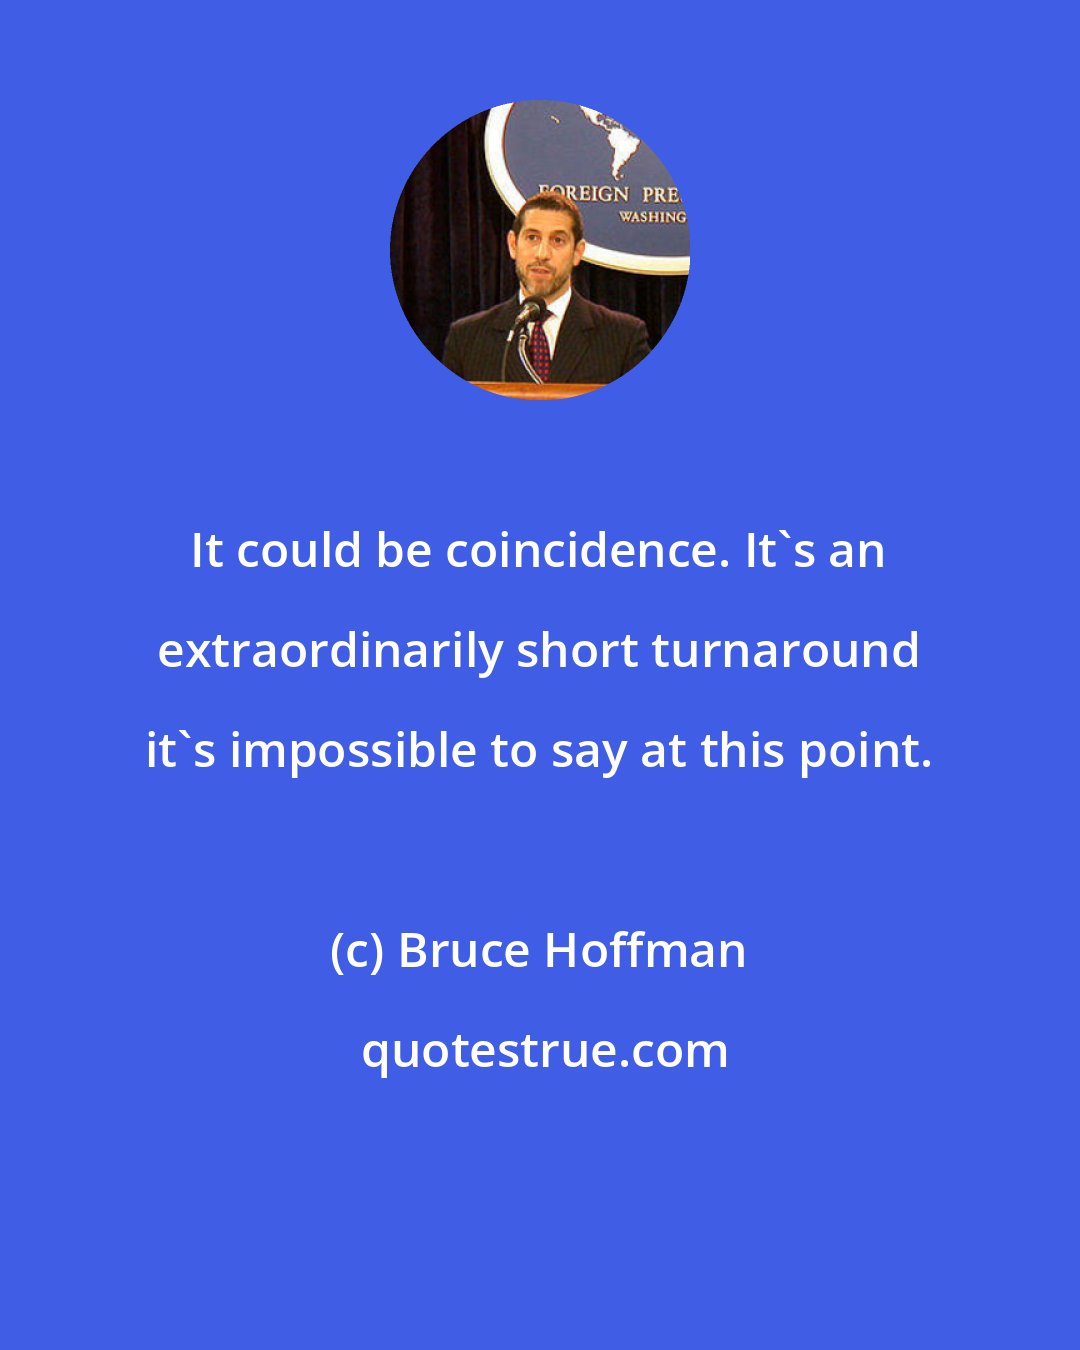 Bruce Hoffman: It could be coincidence. It's an extraordinarily short turnaround it's impossible to say at this point.